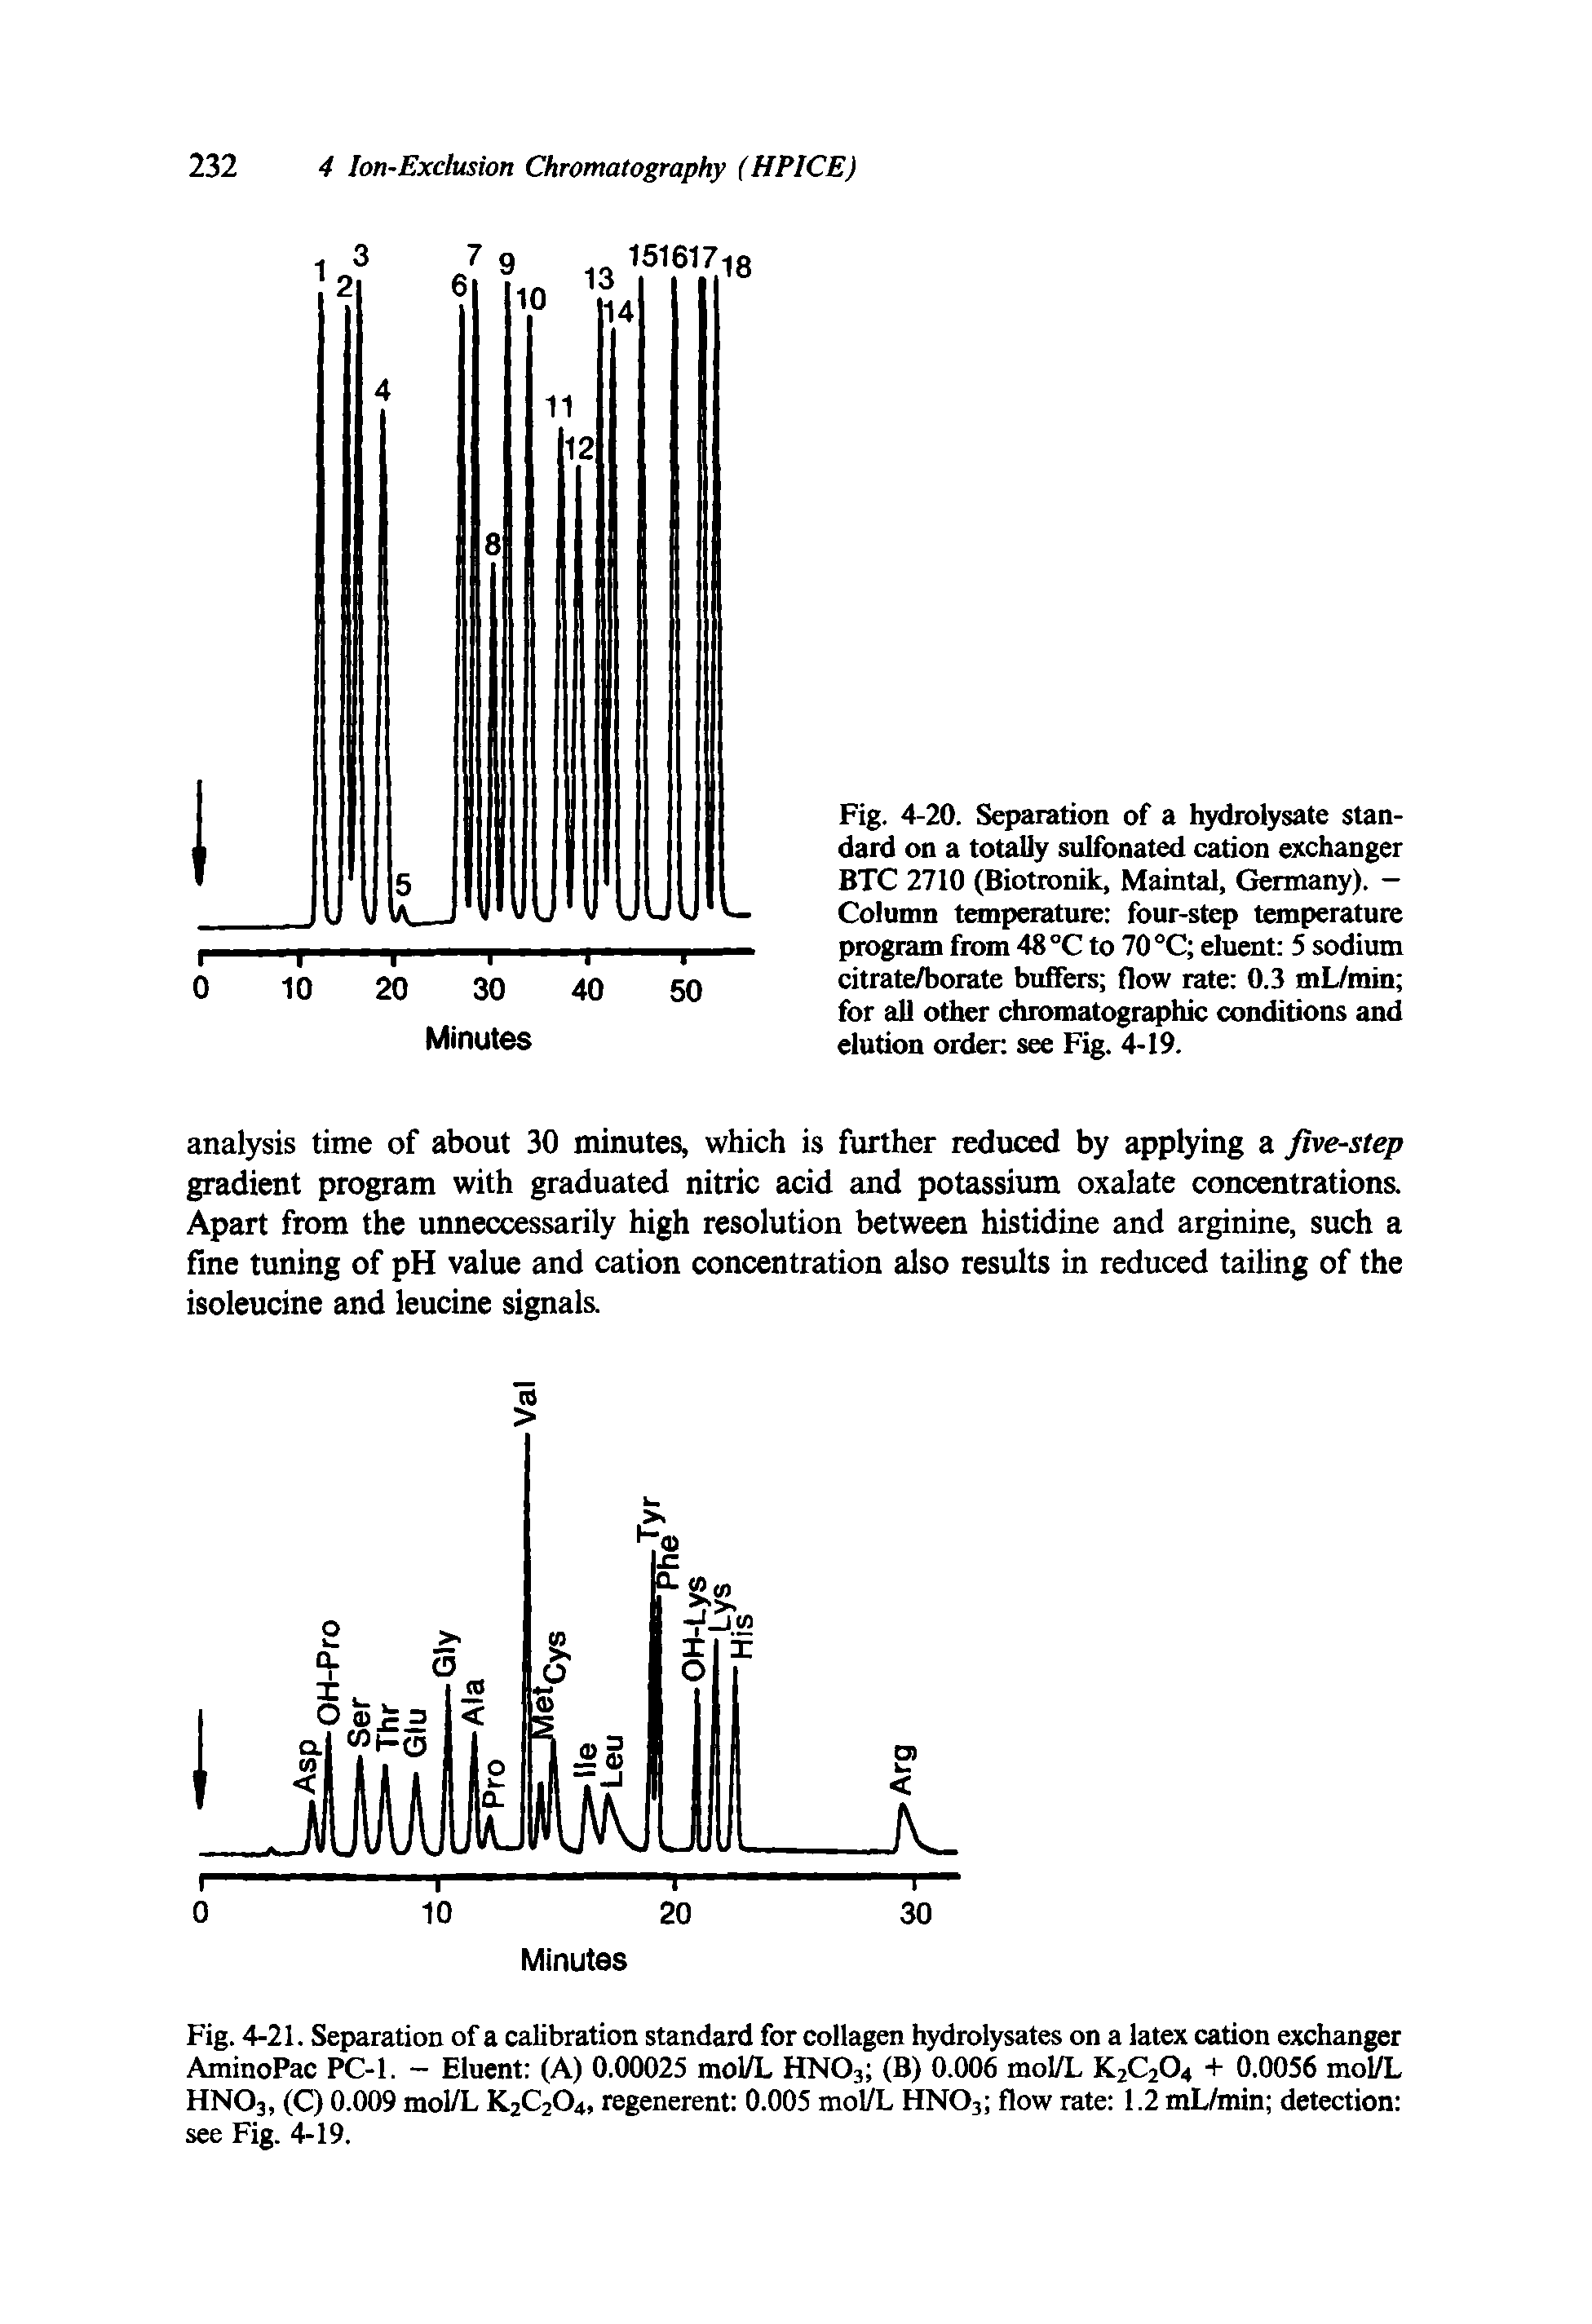 Fig. 4-20. Separation of a hydrolysate standard on a totally sulfonated cation exchanger BTC 2710 (Biotronik, Maintal, Germany). — Column temperature four-step temperature program from 48 °C to 70 °C eluent 5 sodium citrate/borate buffers flow rate 0.3 mL/min for all other chromatographic conditions and elution order see Fig. 4-19.